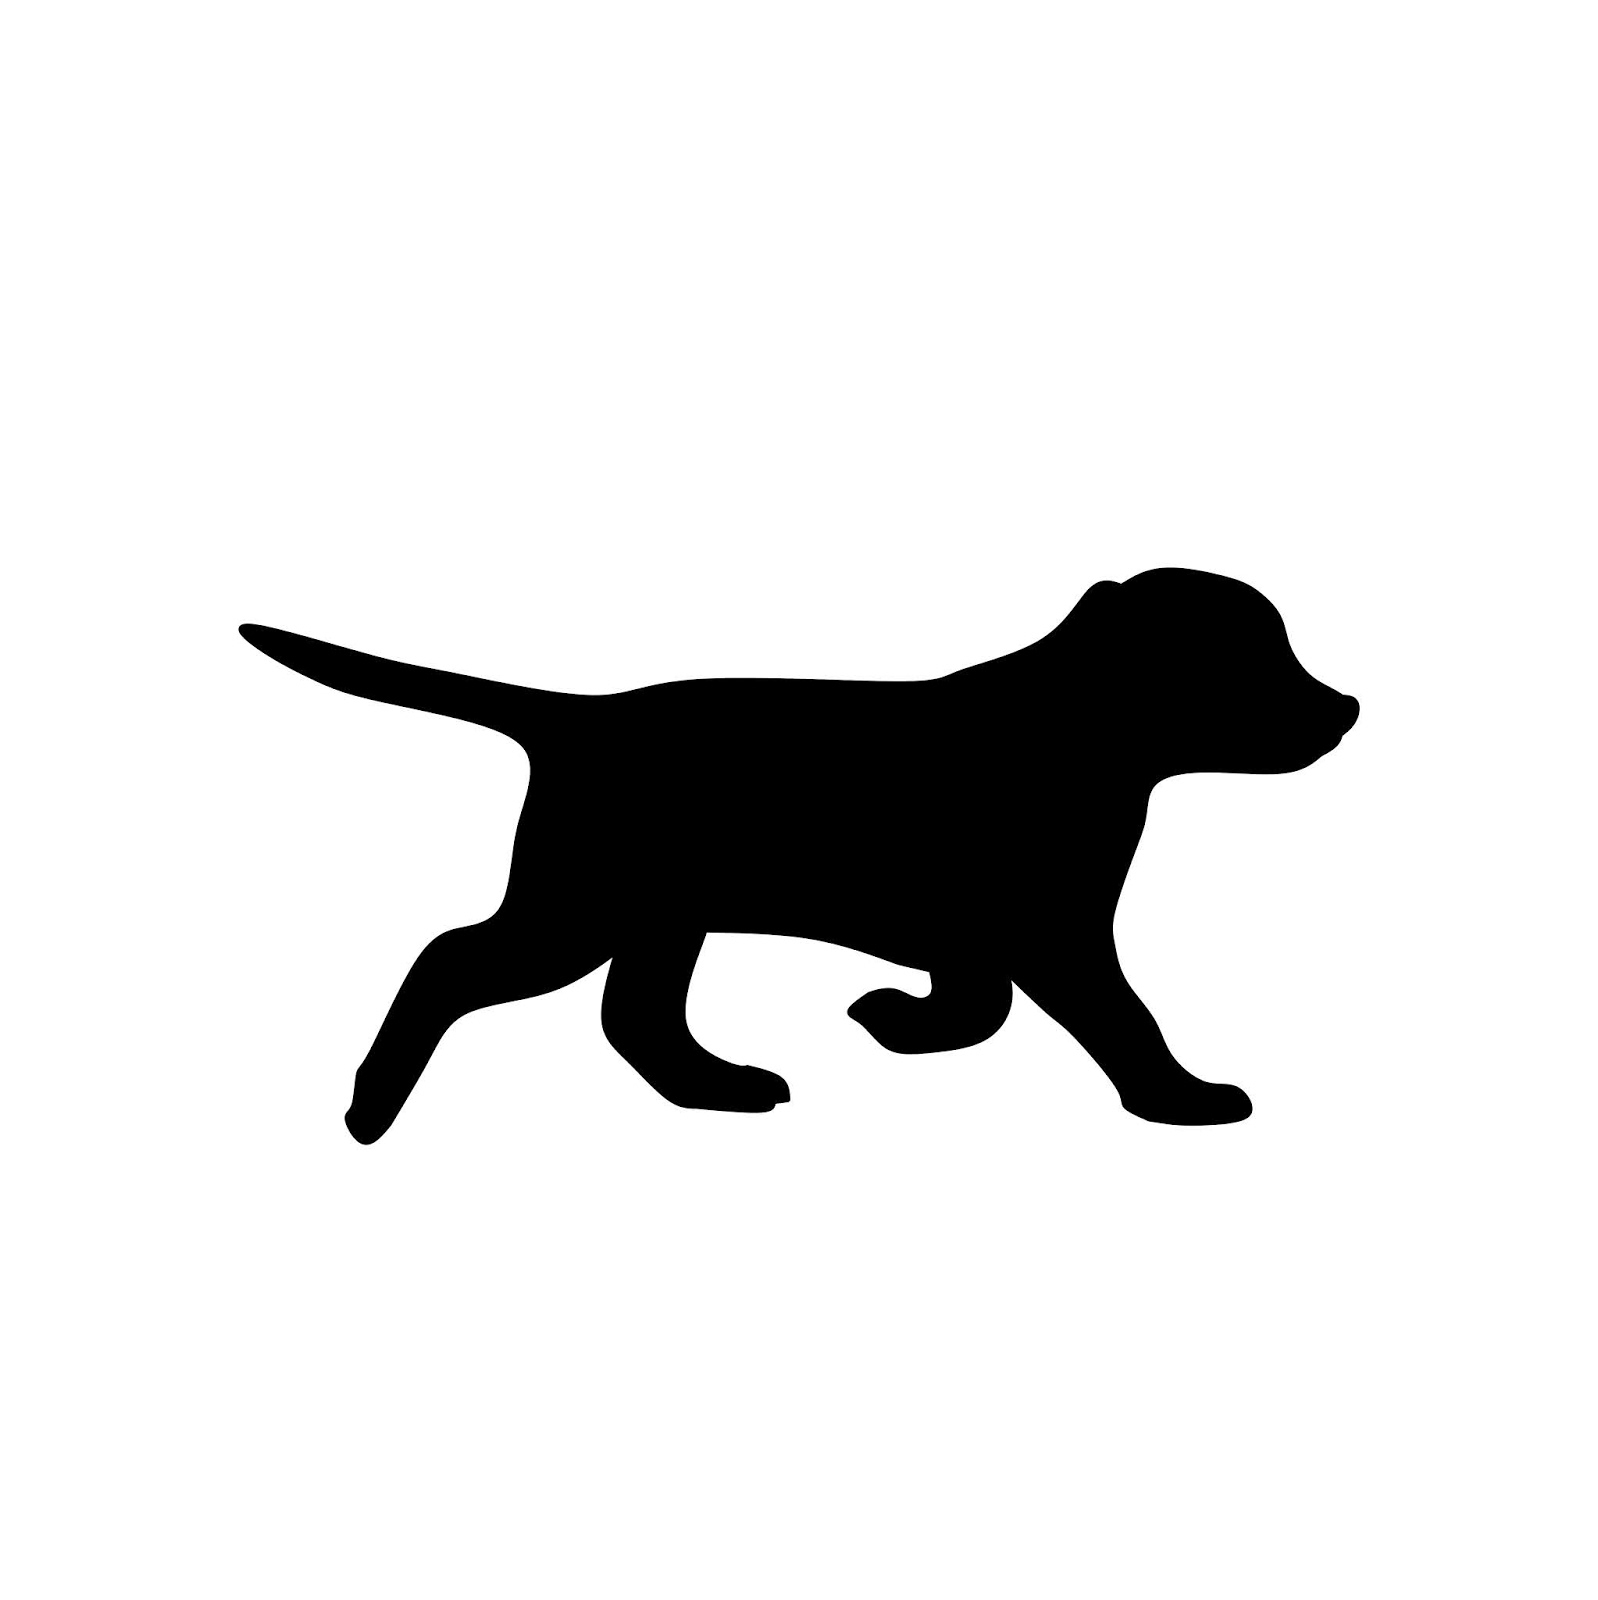 Illustration of puppy dog silhouette